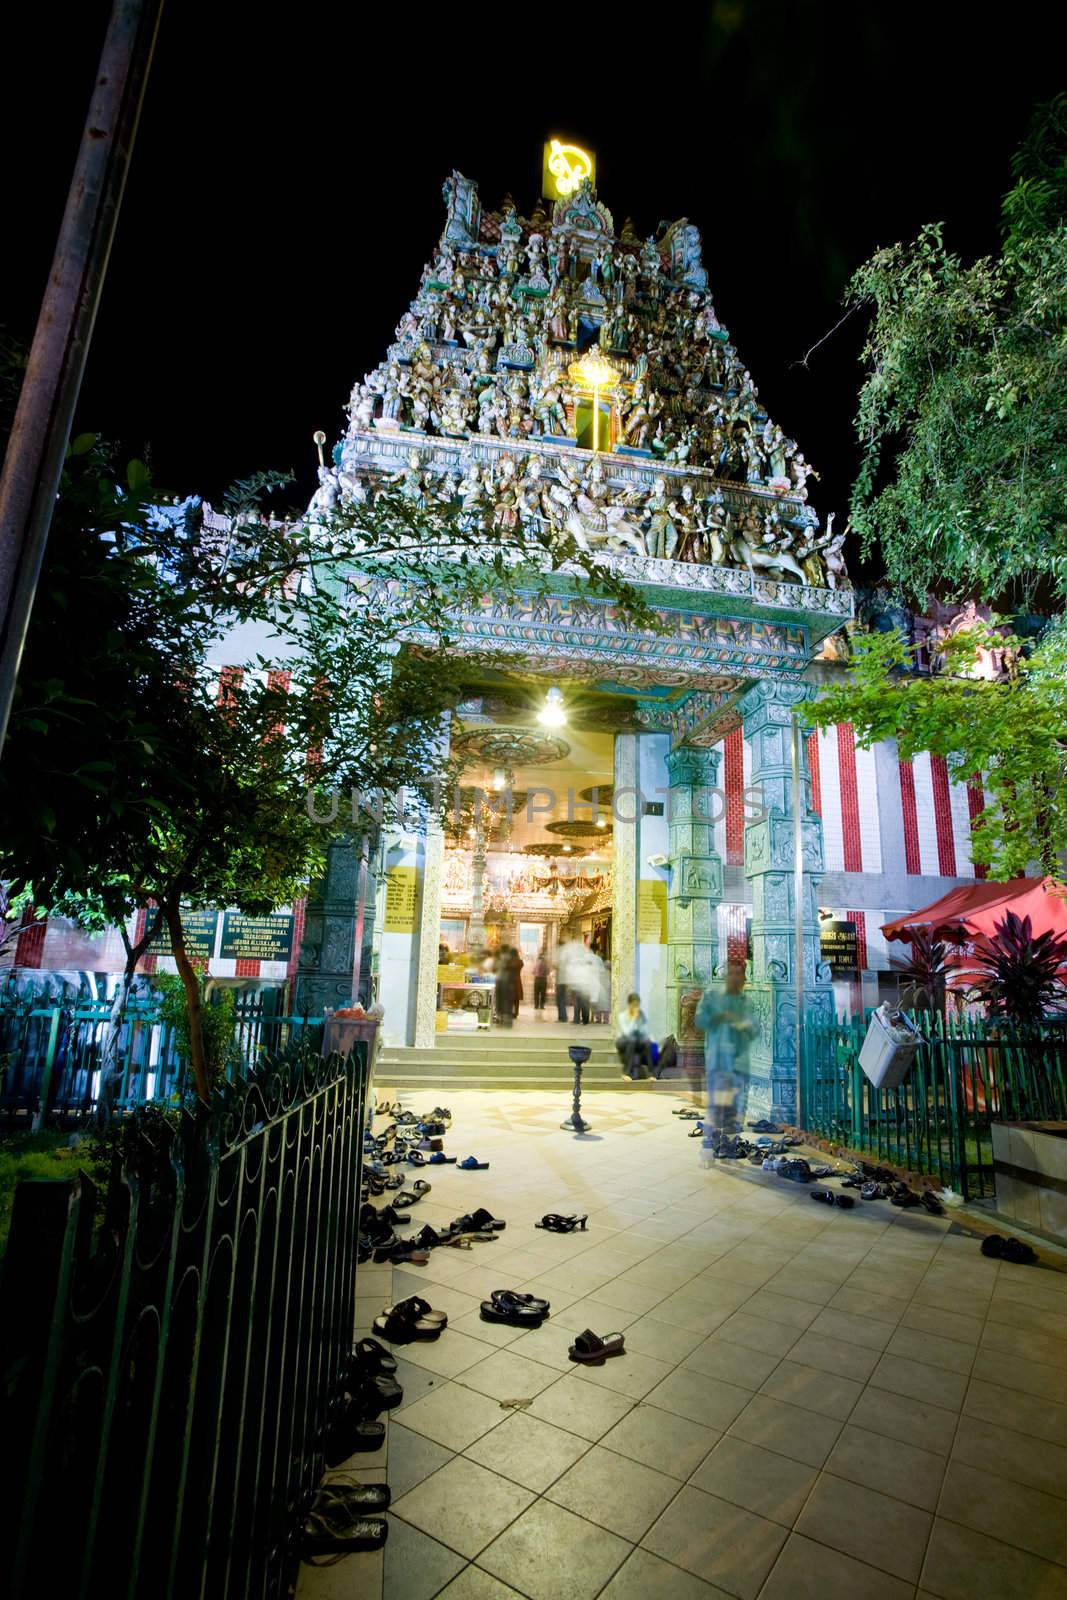 A night shot of a hindu temple in Singapore